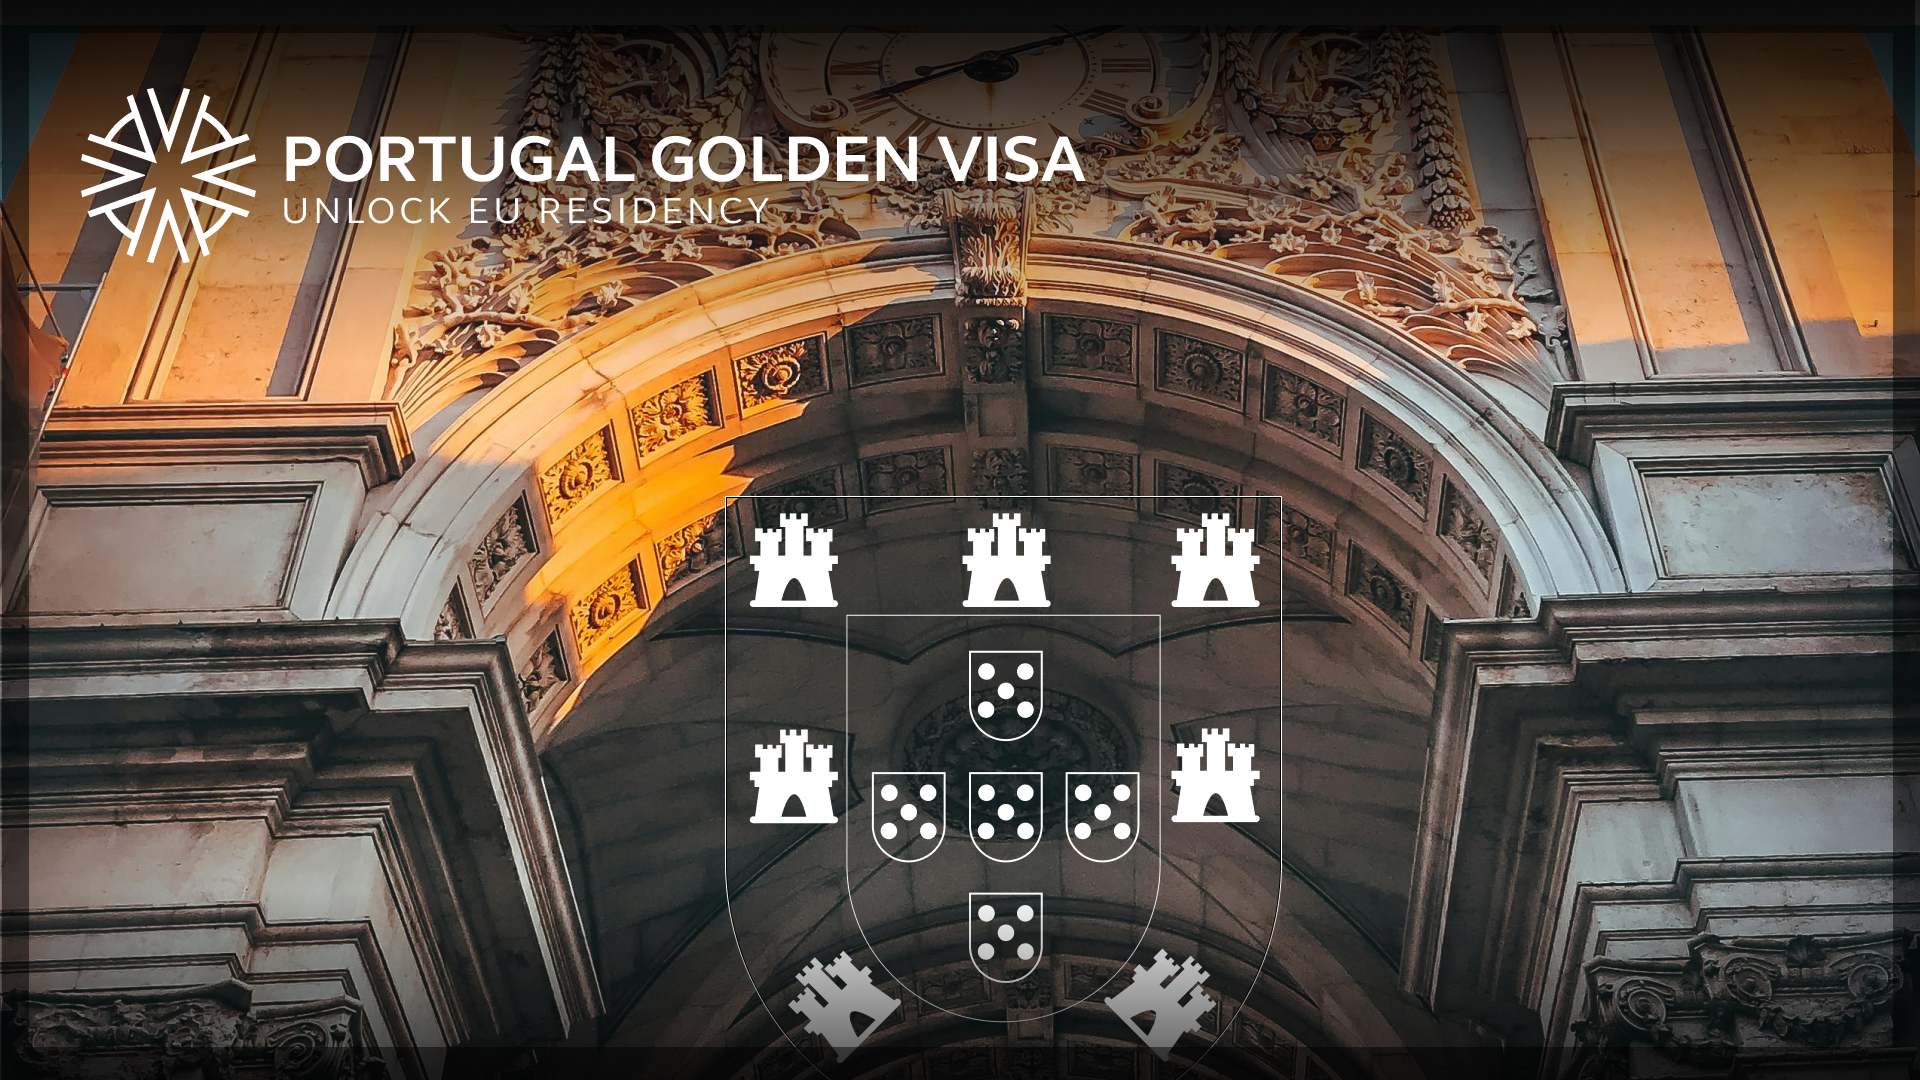 The facade of an iconic building in Portugal with the words Portugal Golden Visa and the national crest